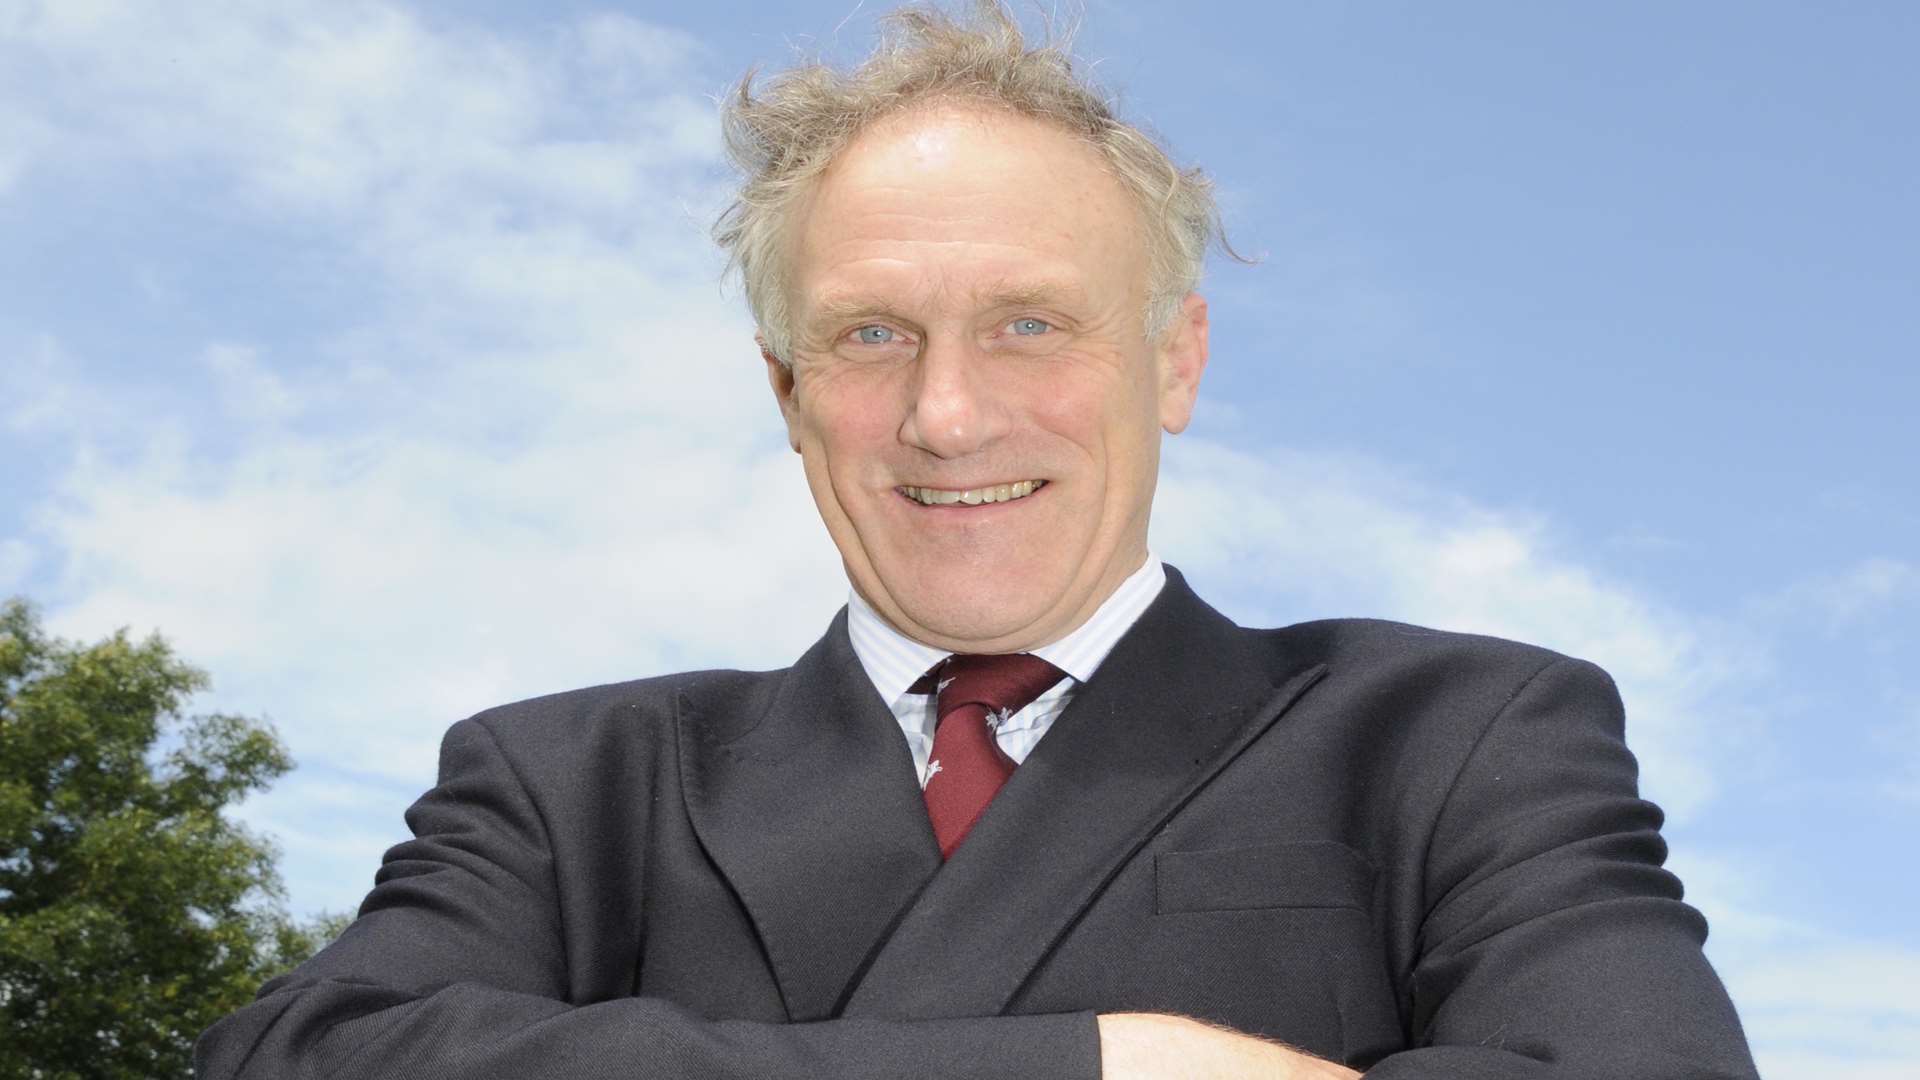 Julian Brazier has denied knowledge that he being lined up for a place in the House of Lords